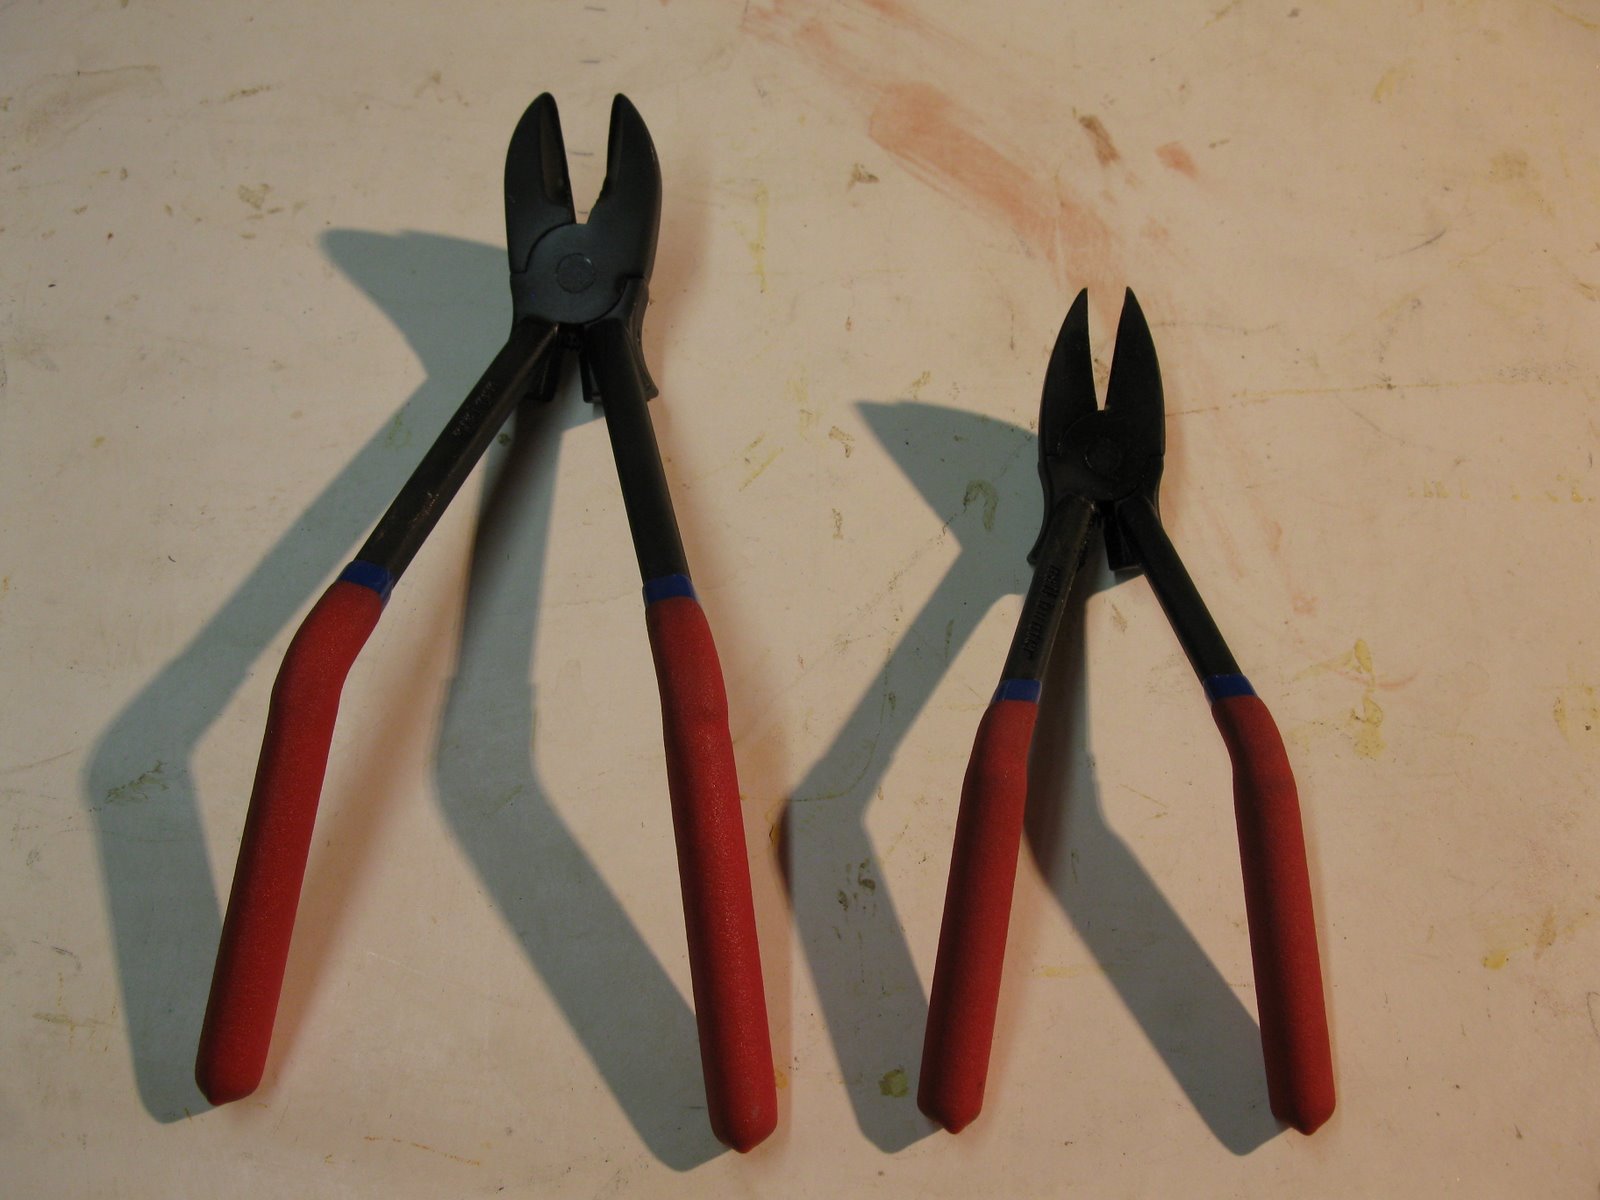 His blog is called, The Nail Jack Family of Nail Pulling Tools.”